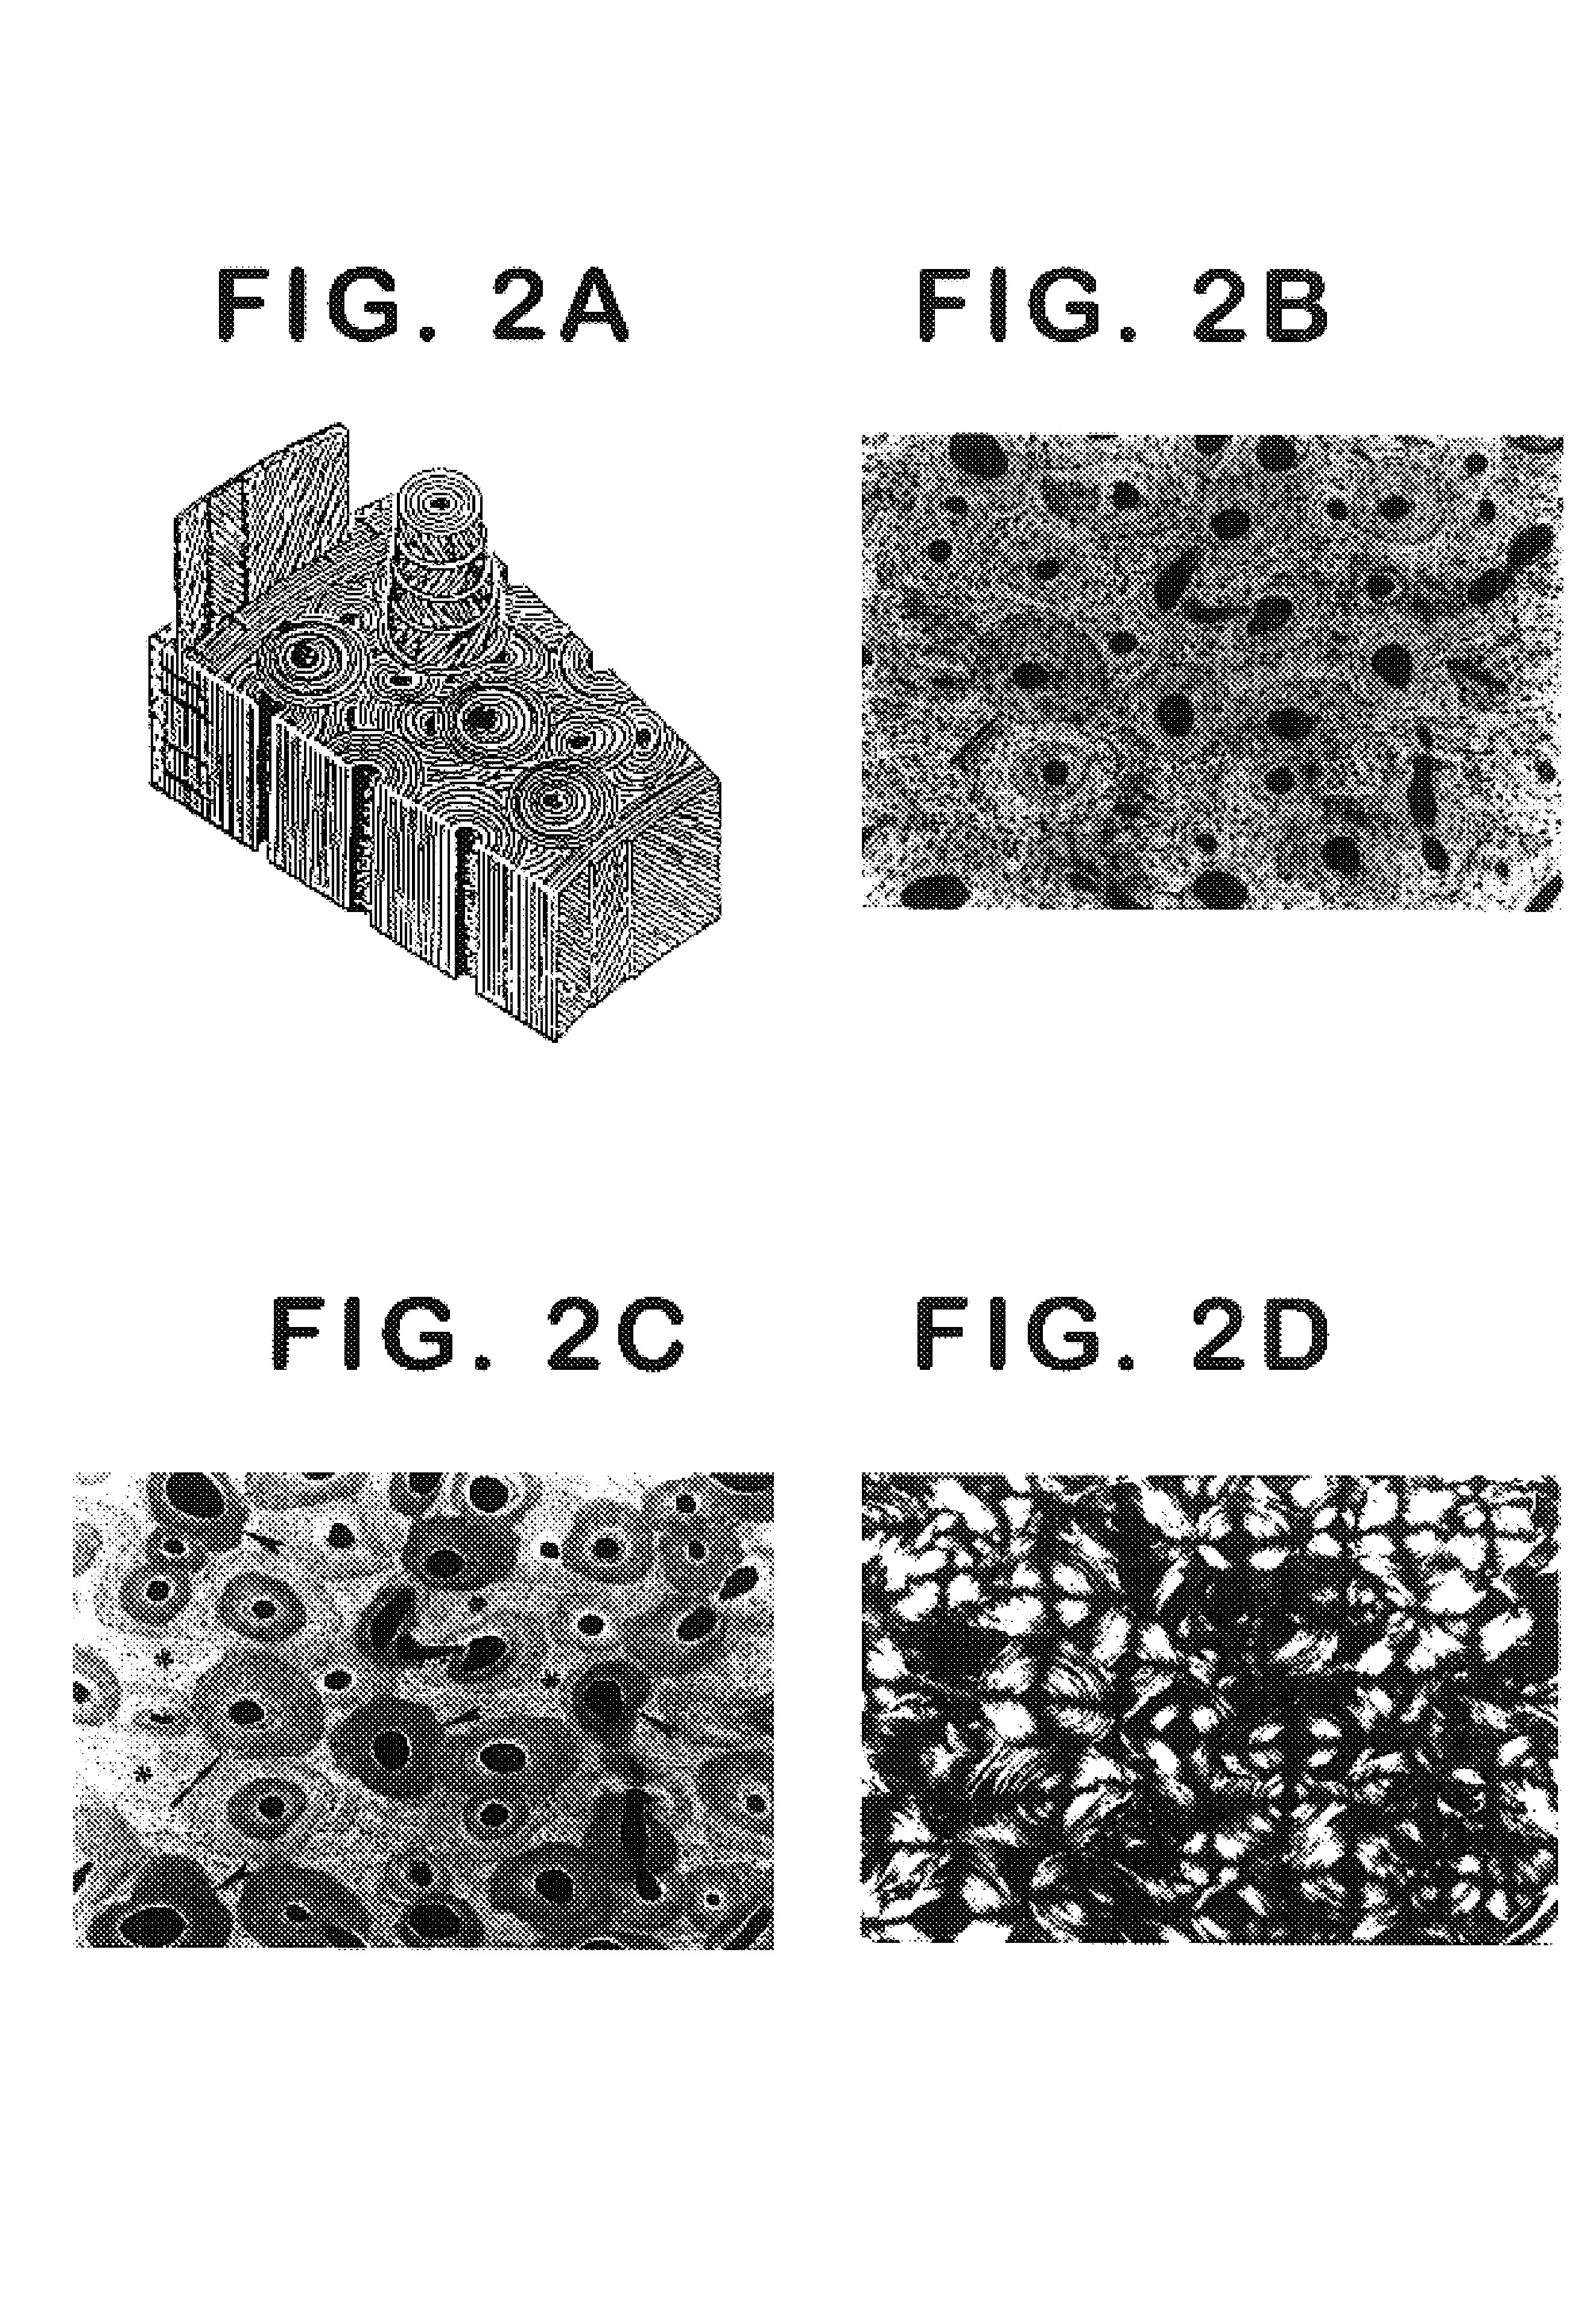 System and method for modeling bone structure